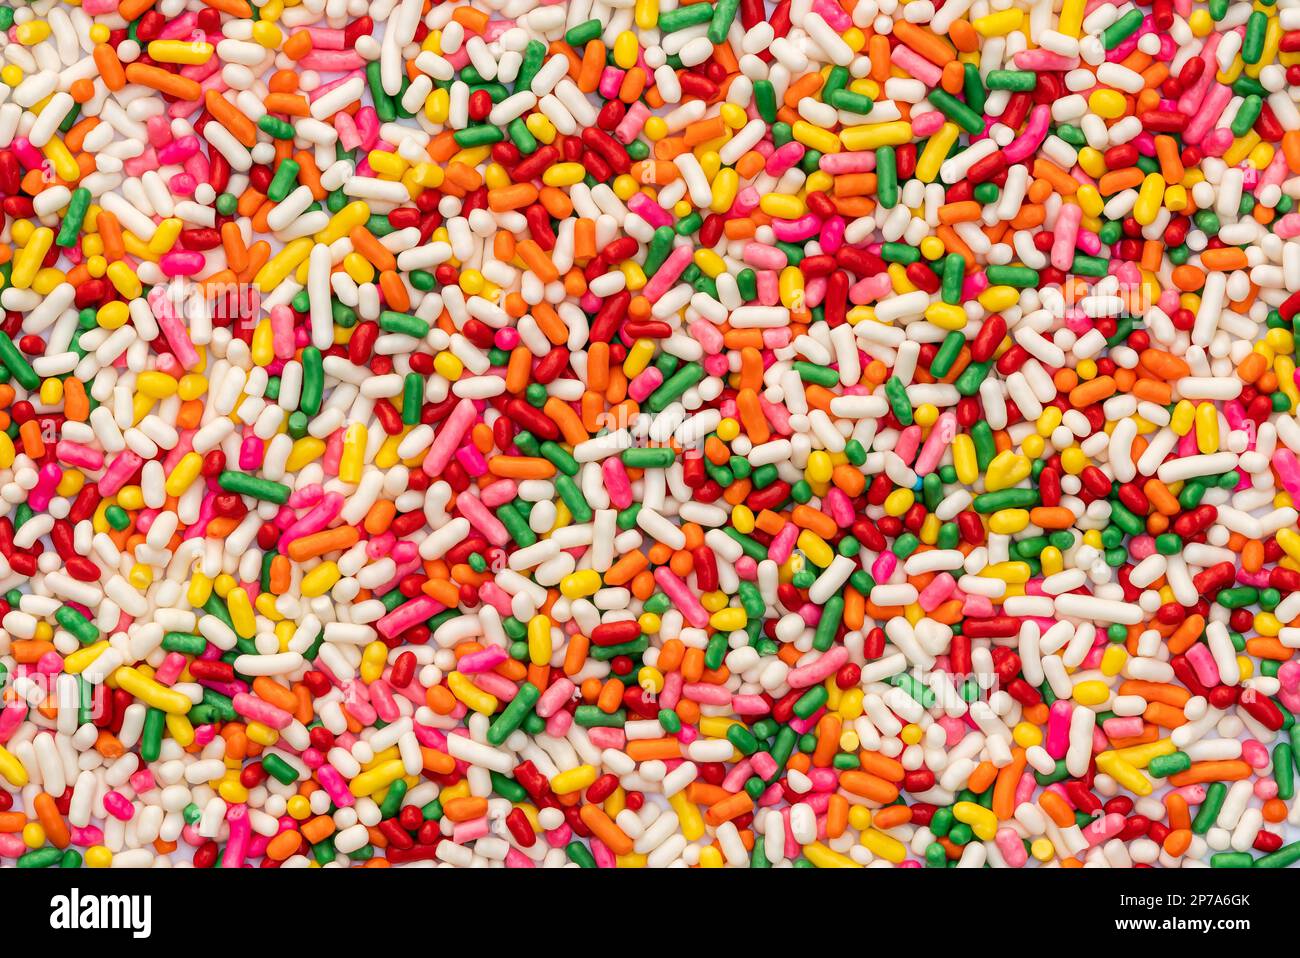 Top view of multicolor rainbow sprinkles. Colorful sprinkles sugar background. Sugar sprinkles is for decoration cake and other bakery items Stock Photo